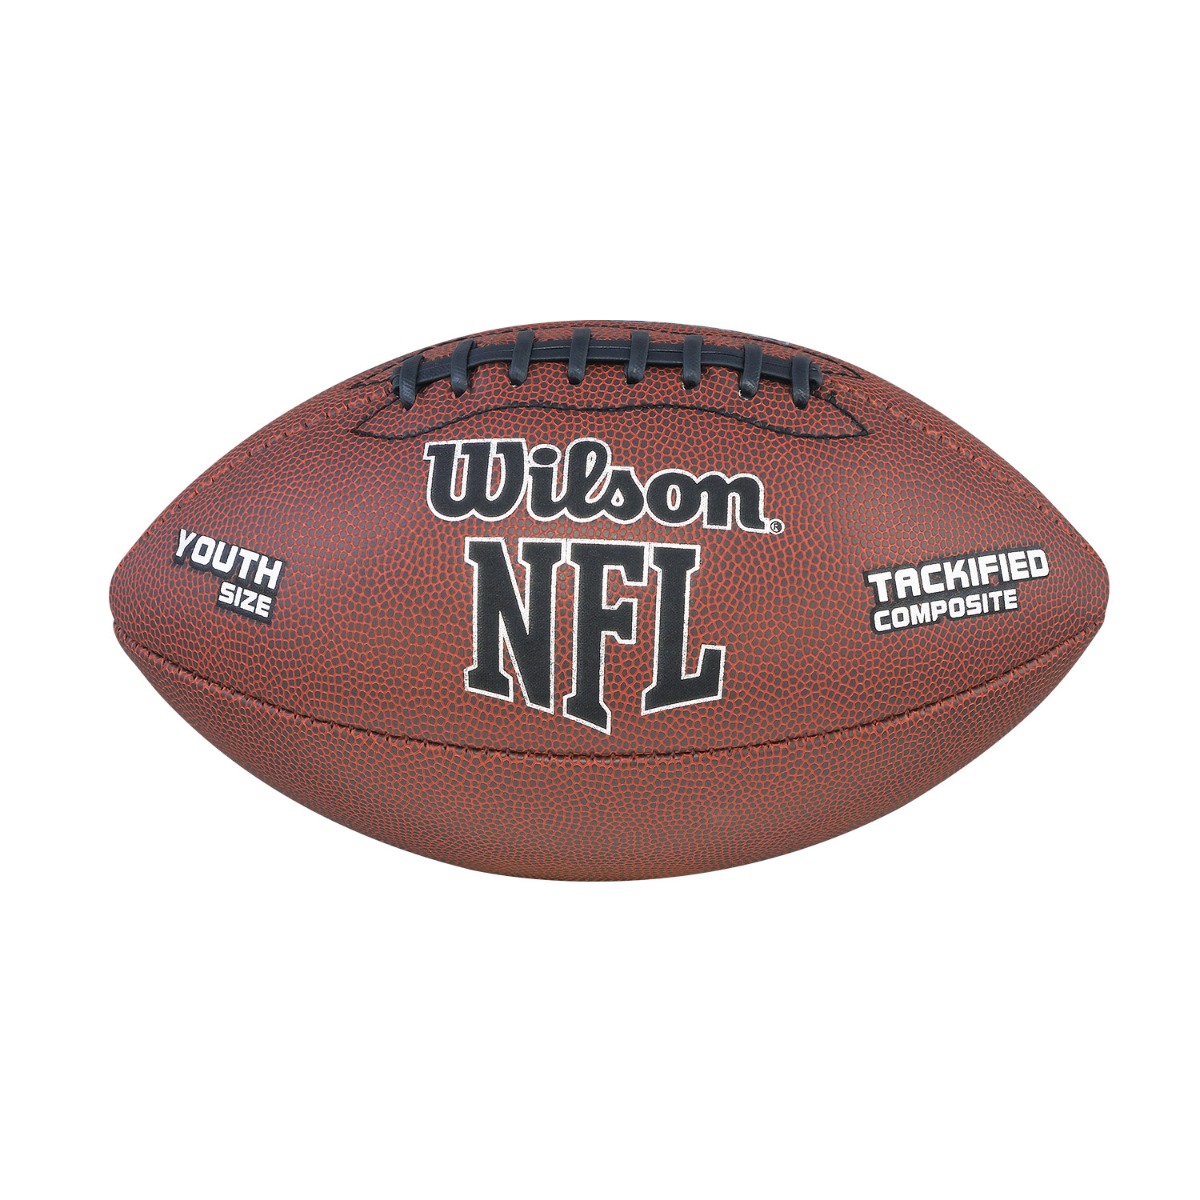 Wilson Youth Size All Pro Composite Football